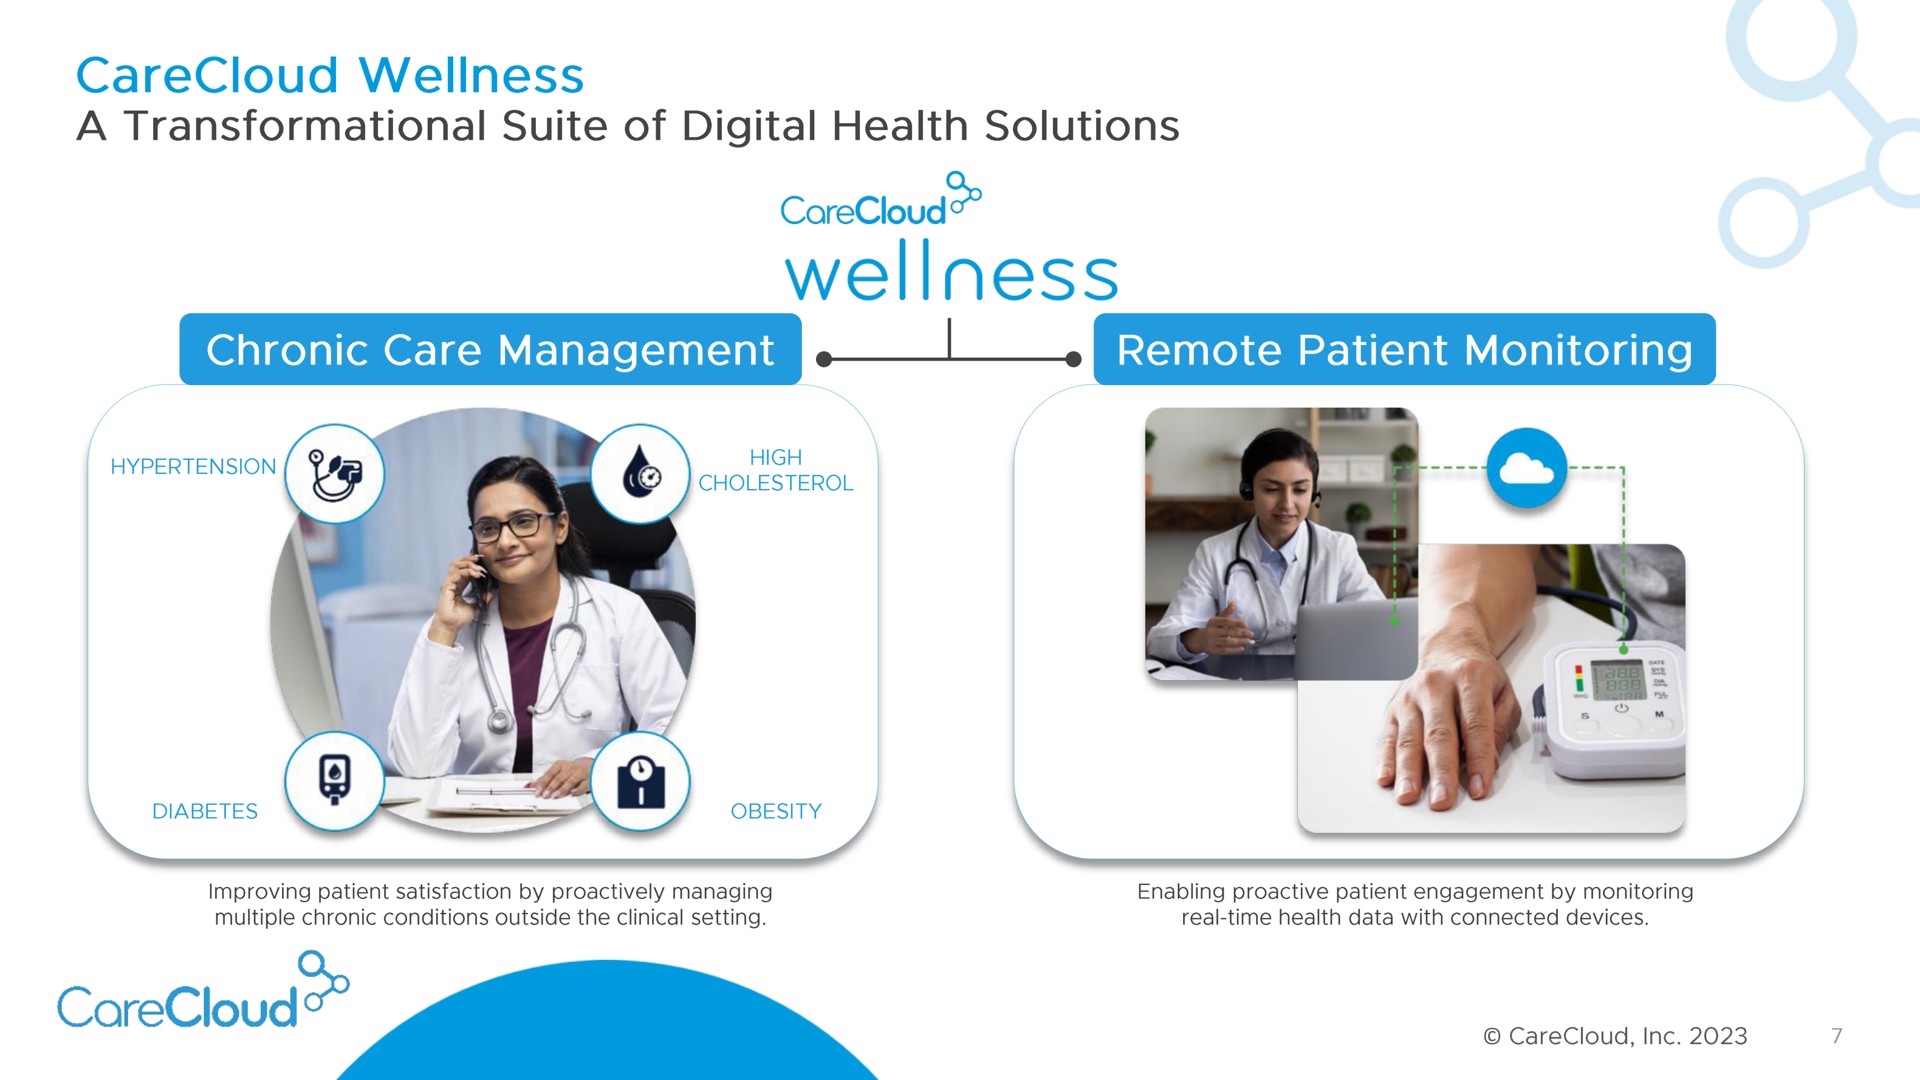 wellness a suite of digital health solutions wellness chronic care management a remote patient monitoring | CareCloud